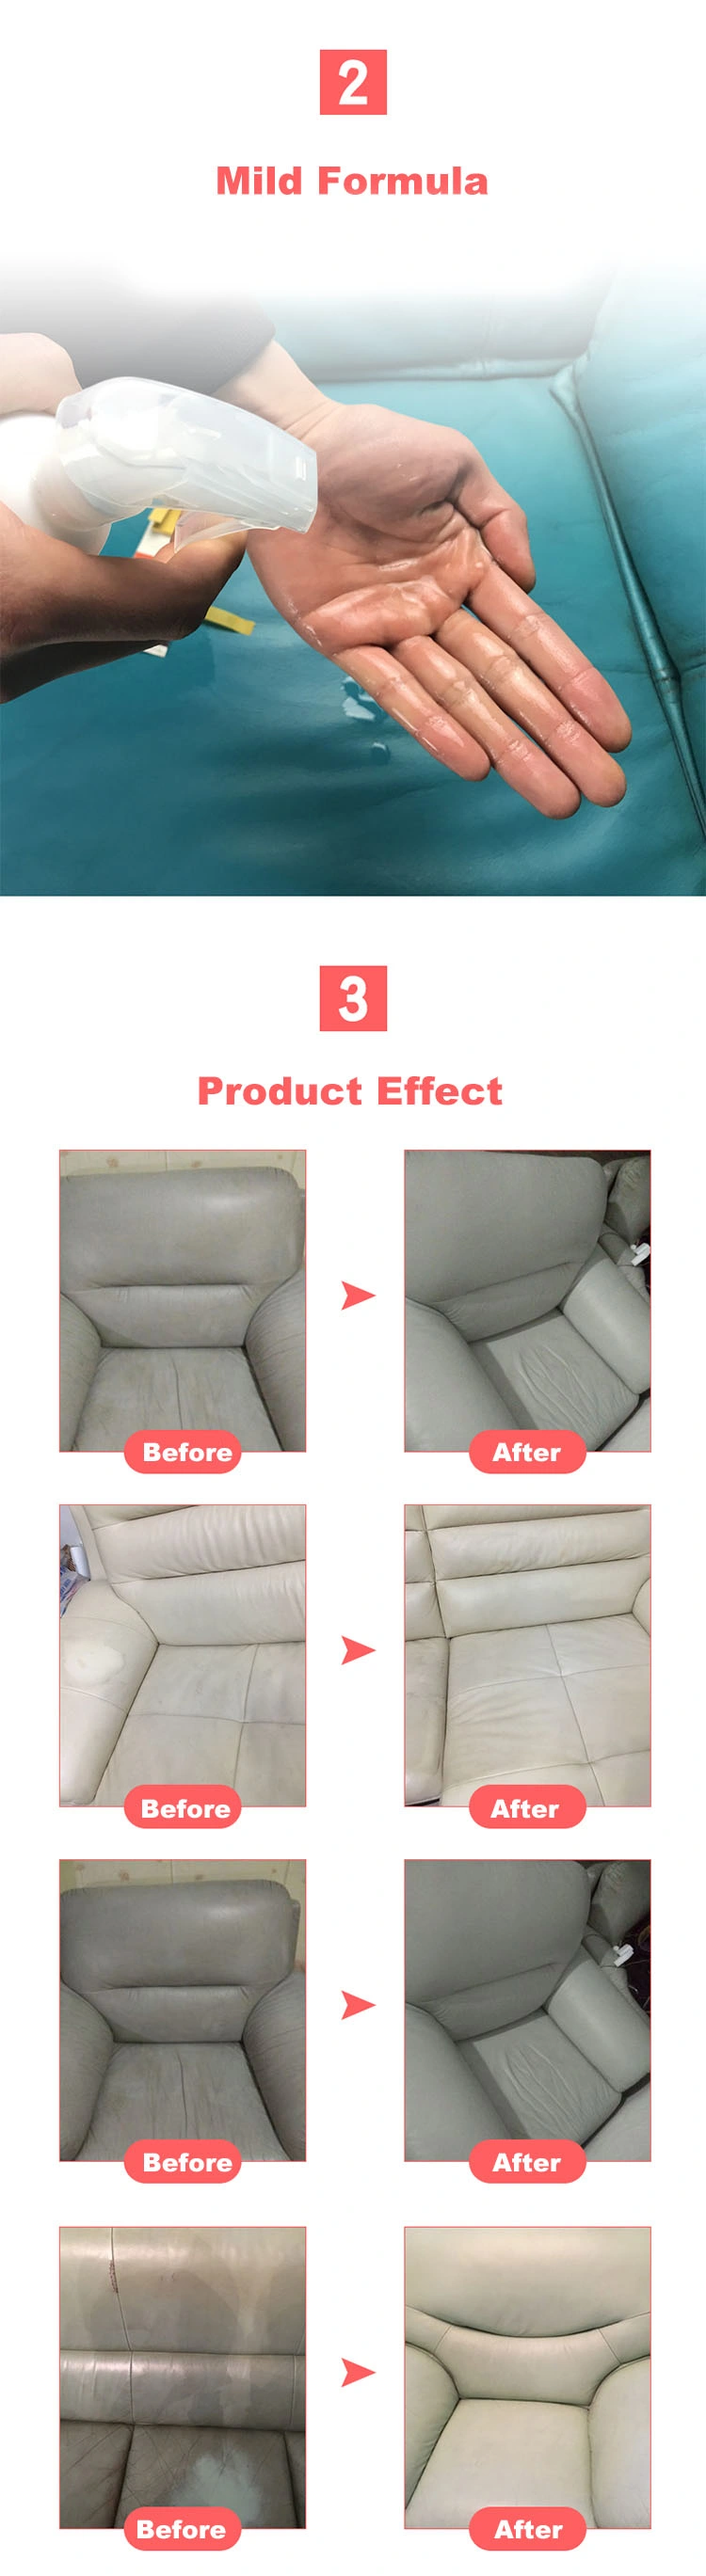 Best Car Leather Furniture Sofa Cleaner Sprayway Glass Stove Top Cleaner Resolve Car Carpet Stain Remover Cleaner Solution